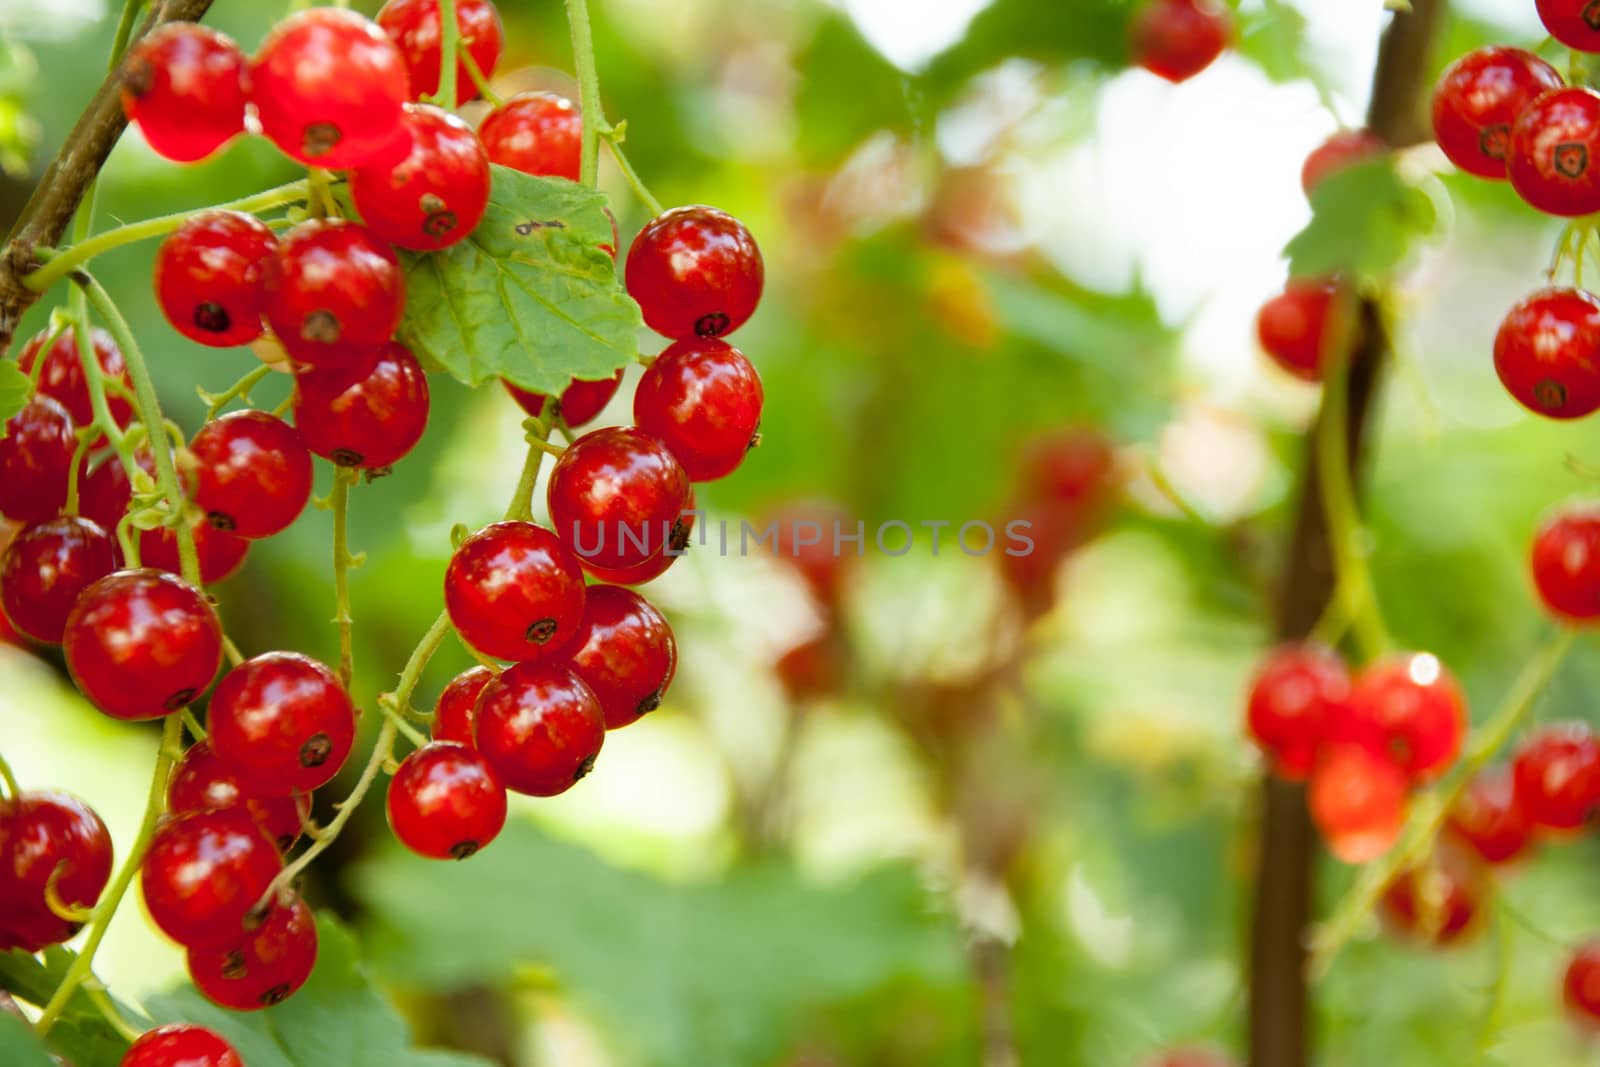 Red currants in the garden on a green background